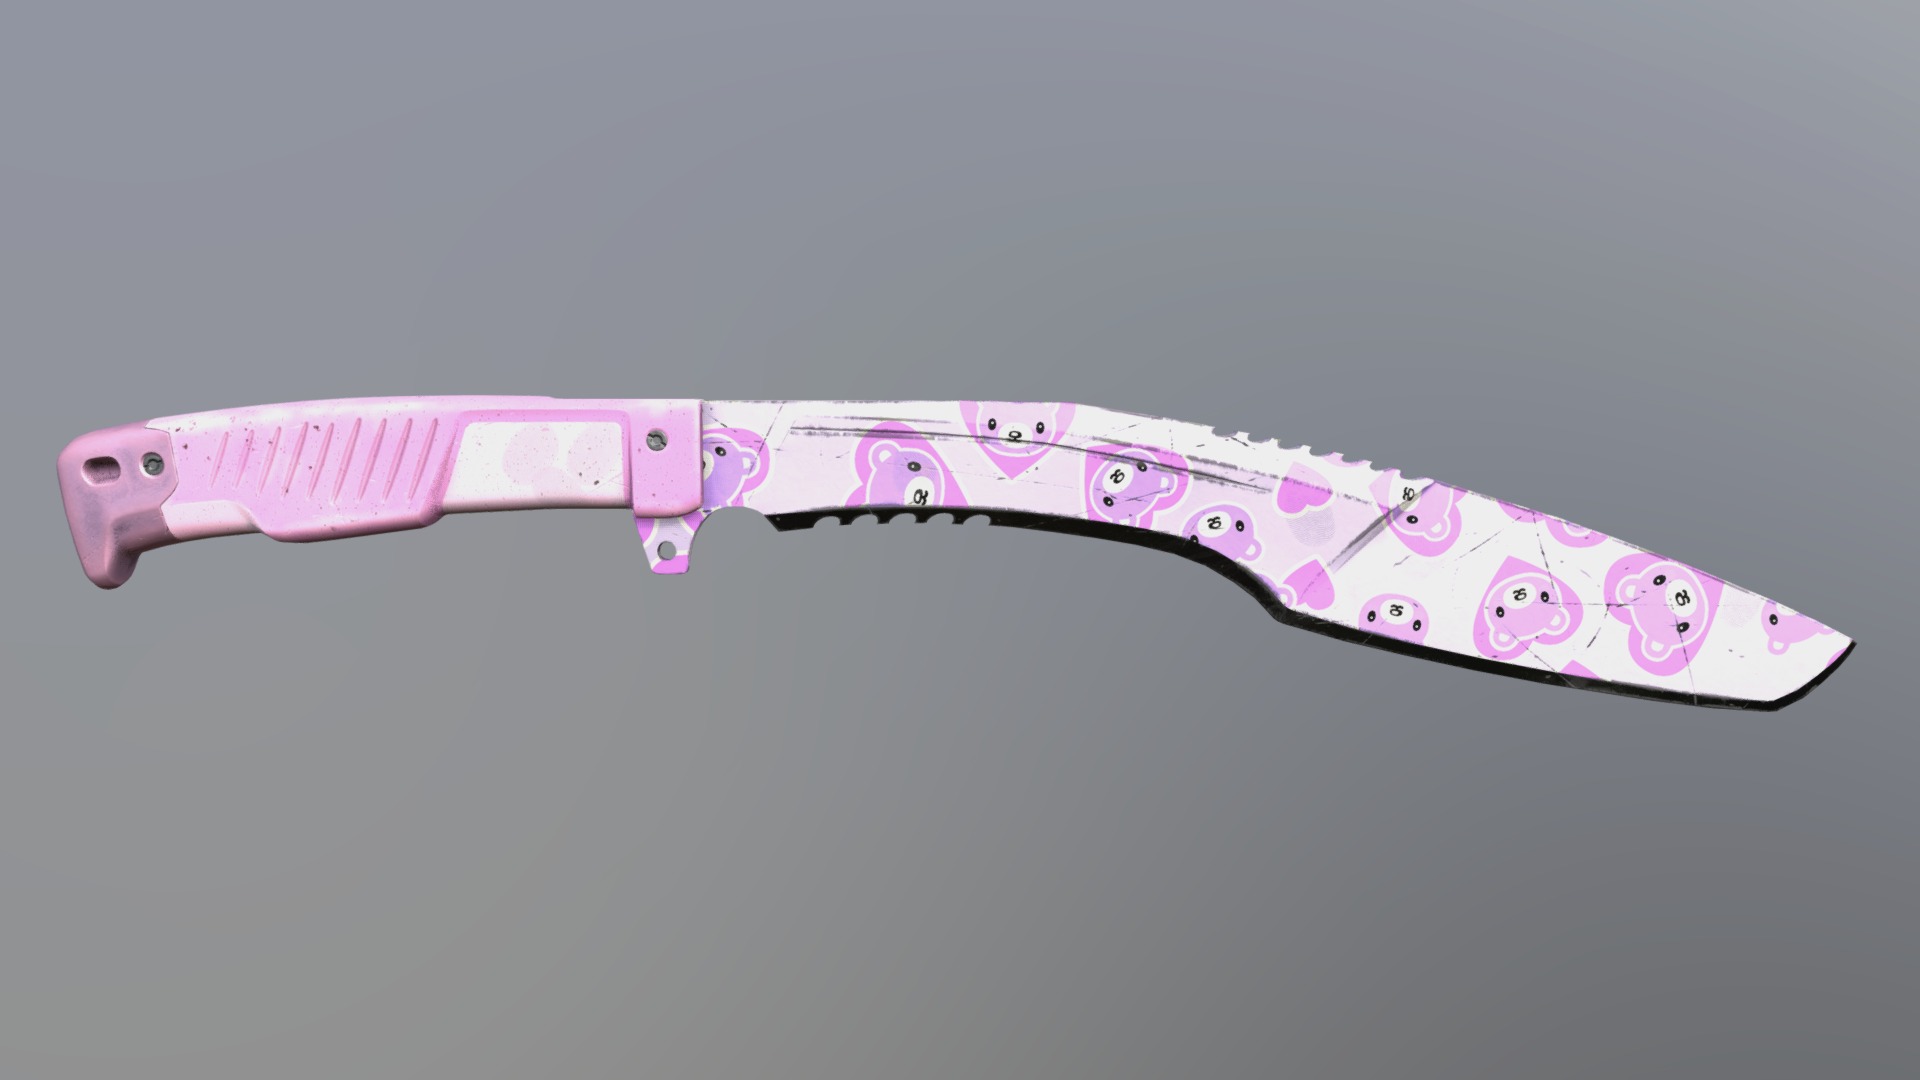 A Kukri knife that I made with the help of a tutorial. The low poly and high poly models were done in 3Ds Max, and the texturing was done in Substance Painter.

This particular texture was inspired by Hello Kitty and various Pink weapon skins.

Texture Reference Image(s):


AKA: Khukuri, Khukri, Kukri, Kukkri, Nepalese knife, etc:

Model Statistics:

[Low Poly]

Polys: 1,414

Verts: 1,572

Triangles: 3,144

[High Poly]

Polys: 668,672

Verts: 669,842

Triangles: 1,337,344 - Kukri Knife - Hello Teddy Reskin - 3D model by Omnipotent 3d model